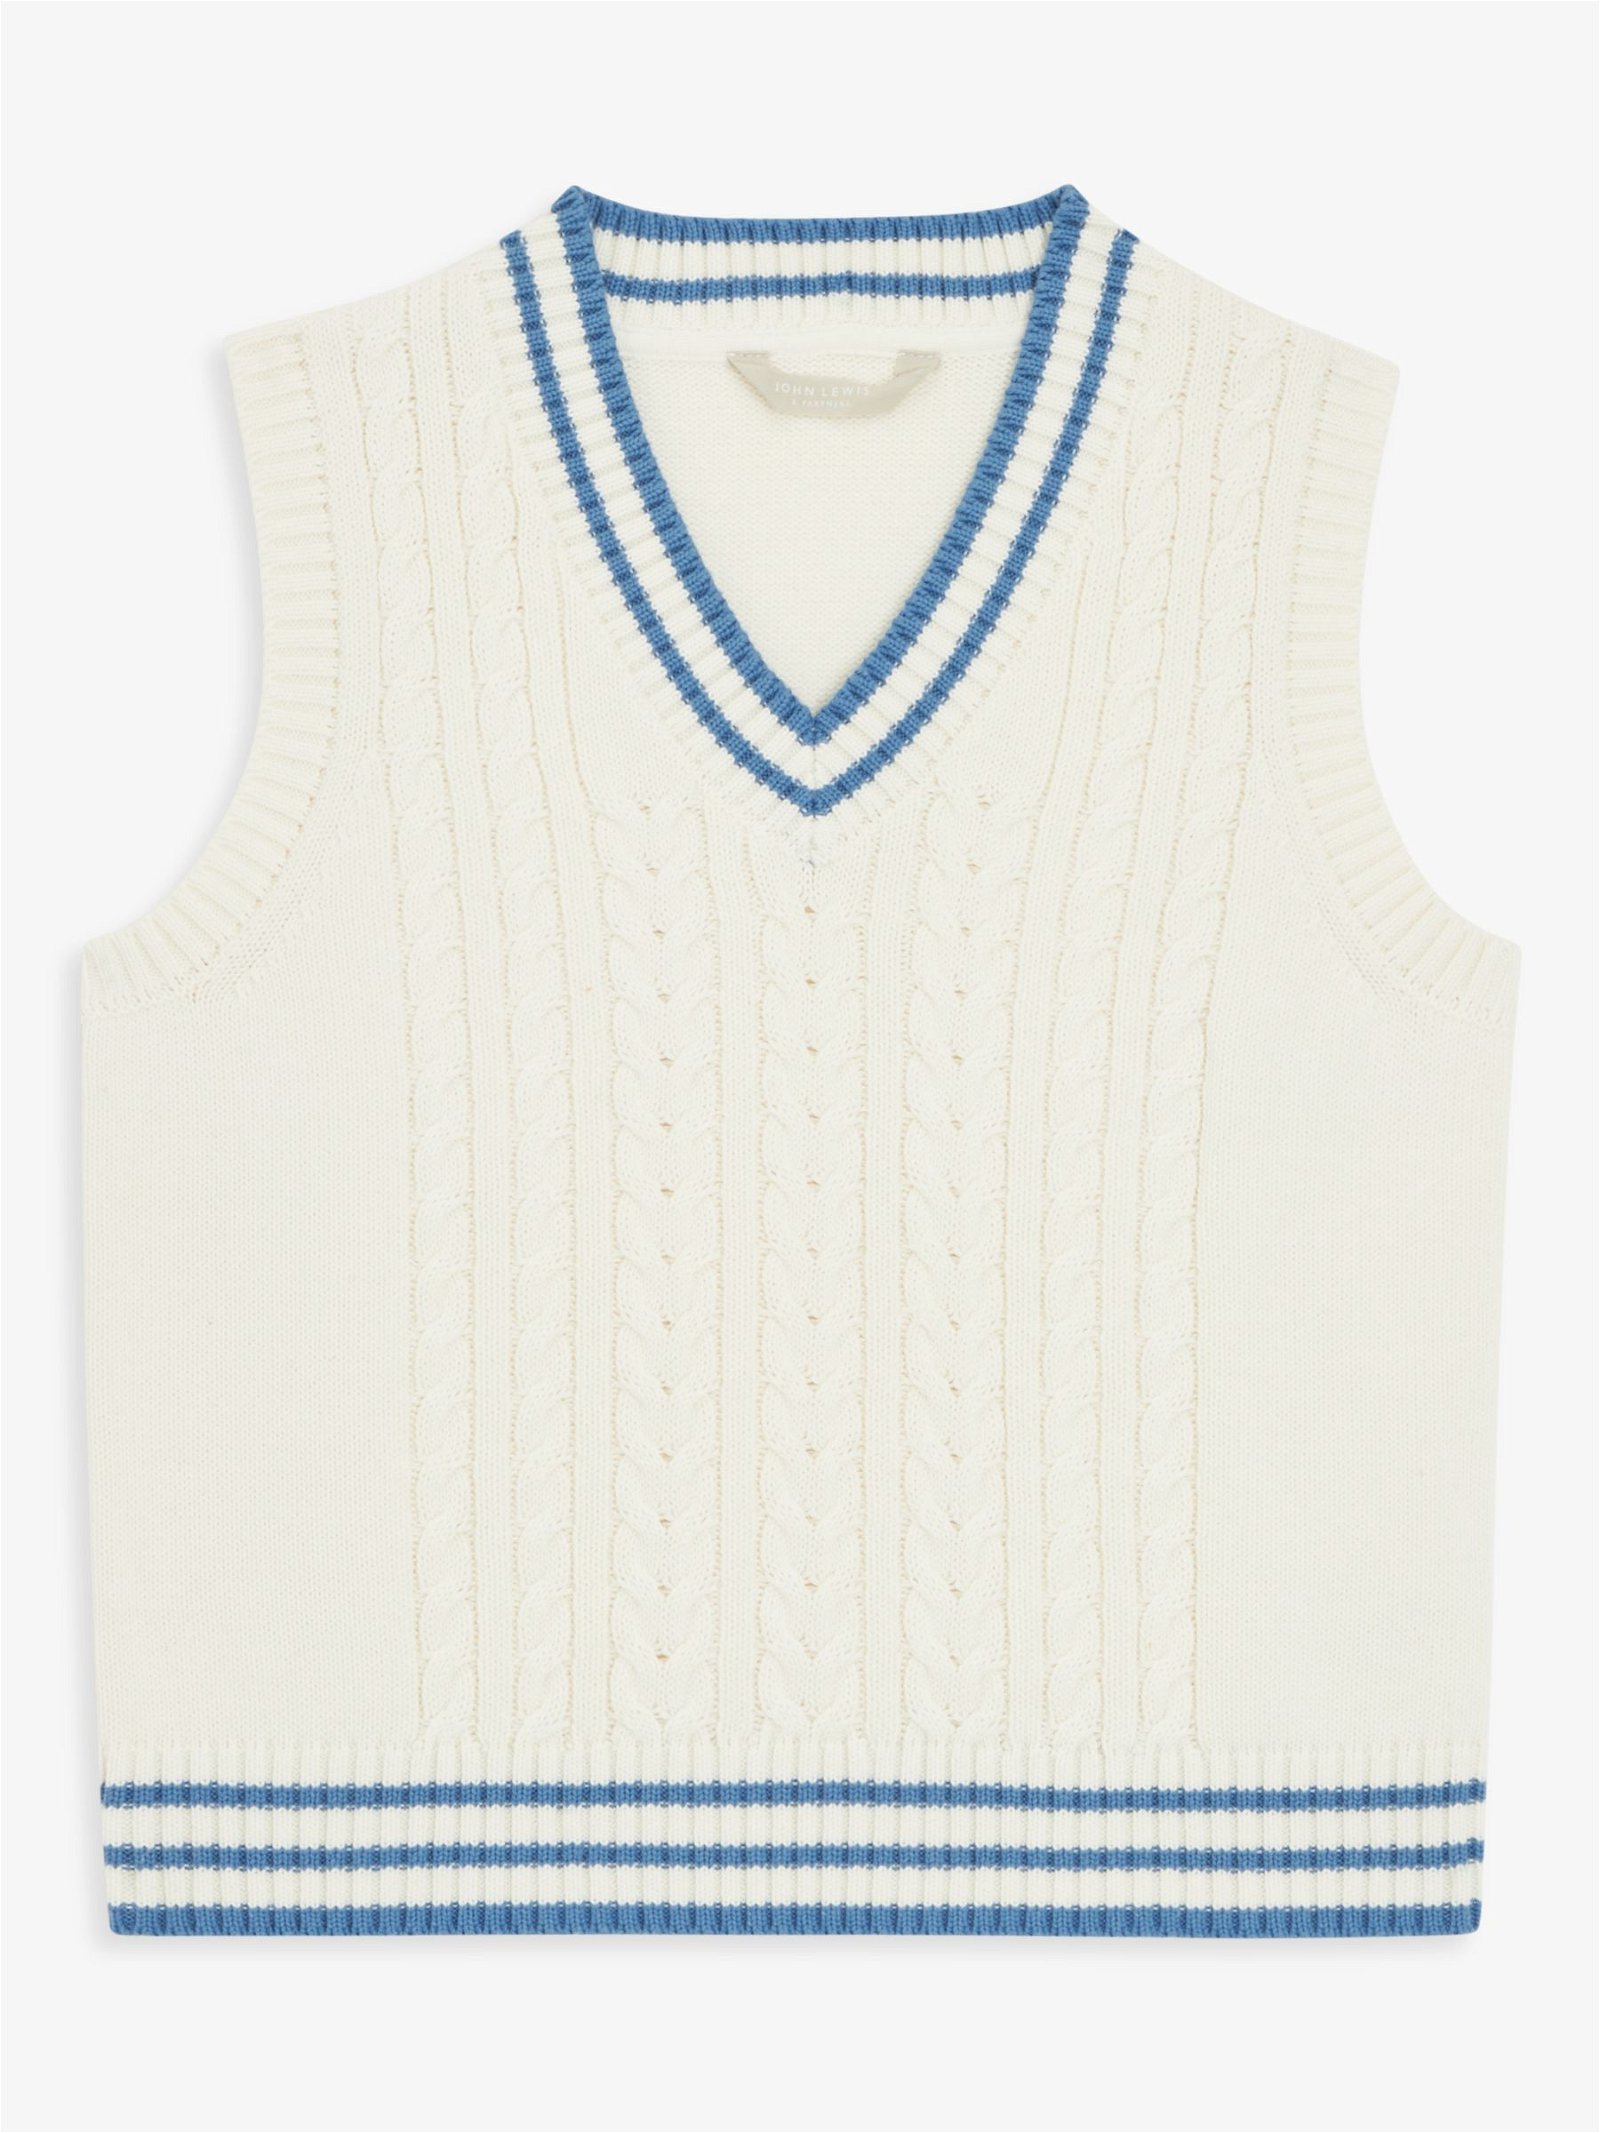 JOHN LEWIS Cable Knit Cricket Tank Top in Ivory